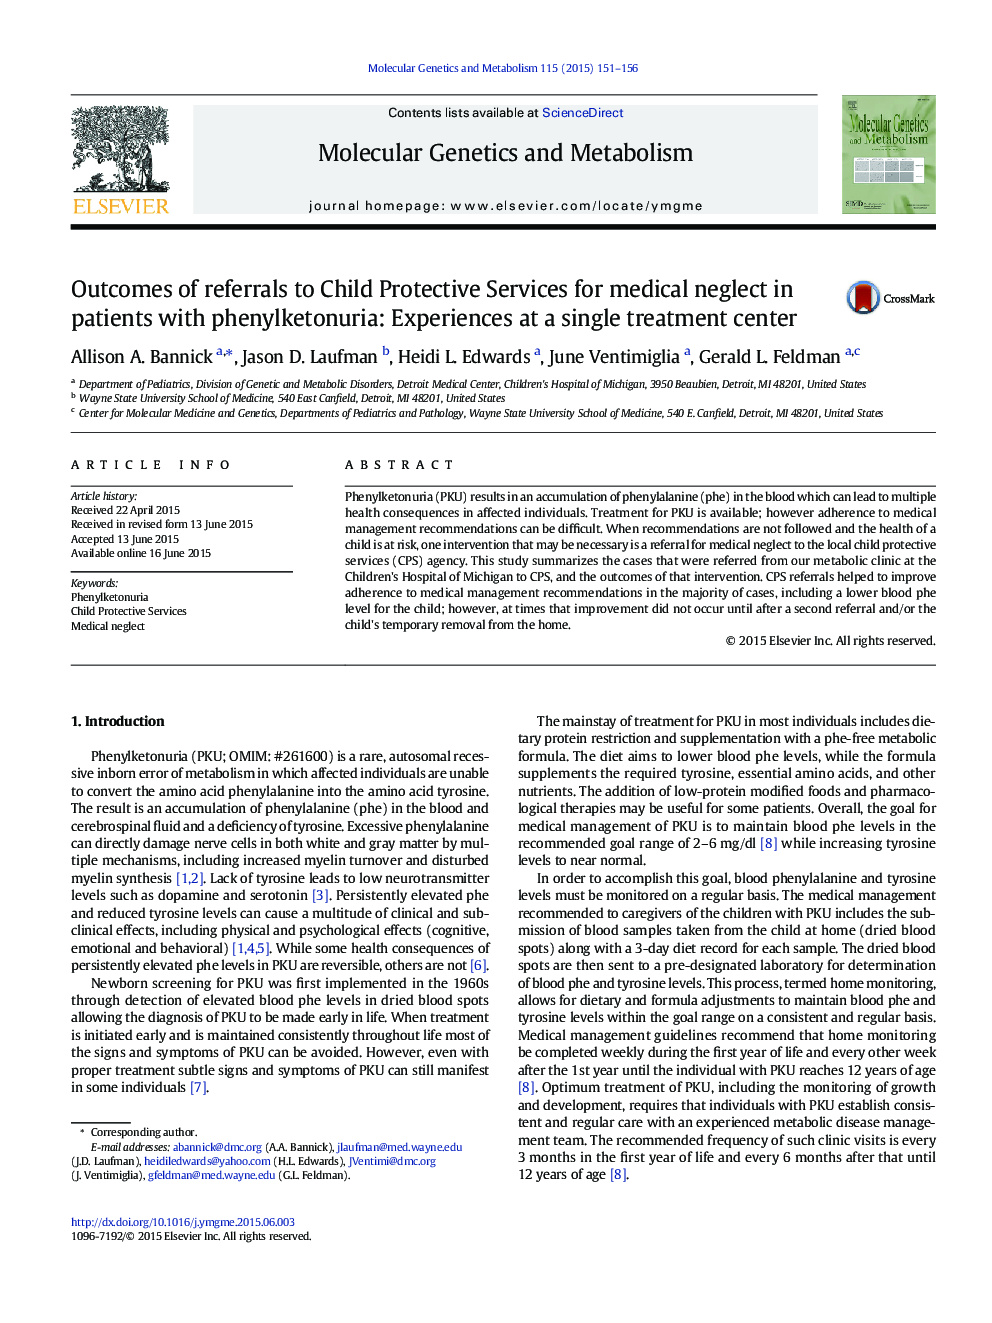 Outcomes of referrals to Child Protective Services for medical neglect in patients with phenylketonuria: Experiences at a single treatment center